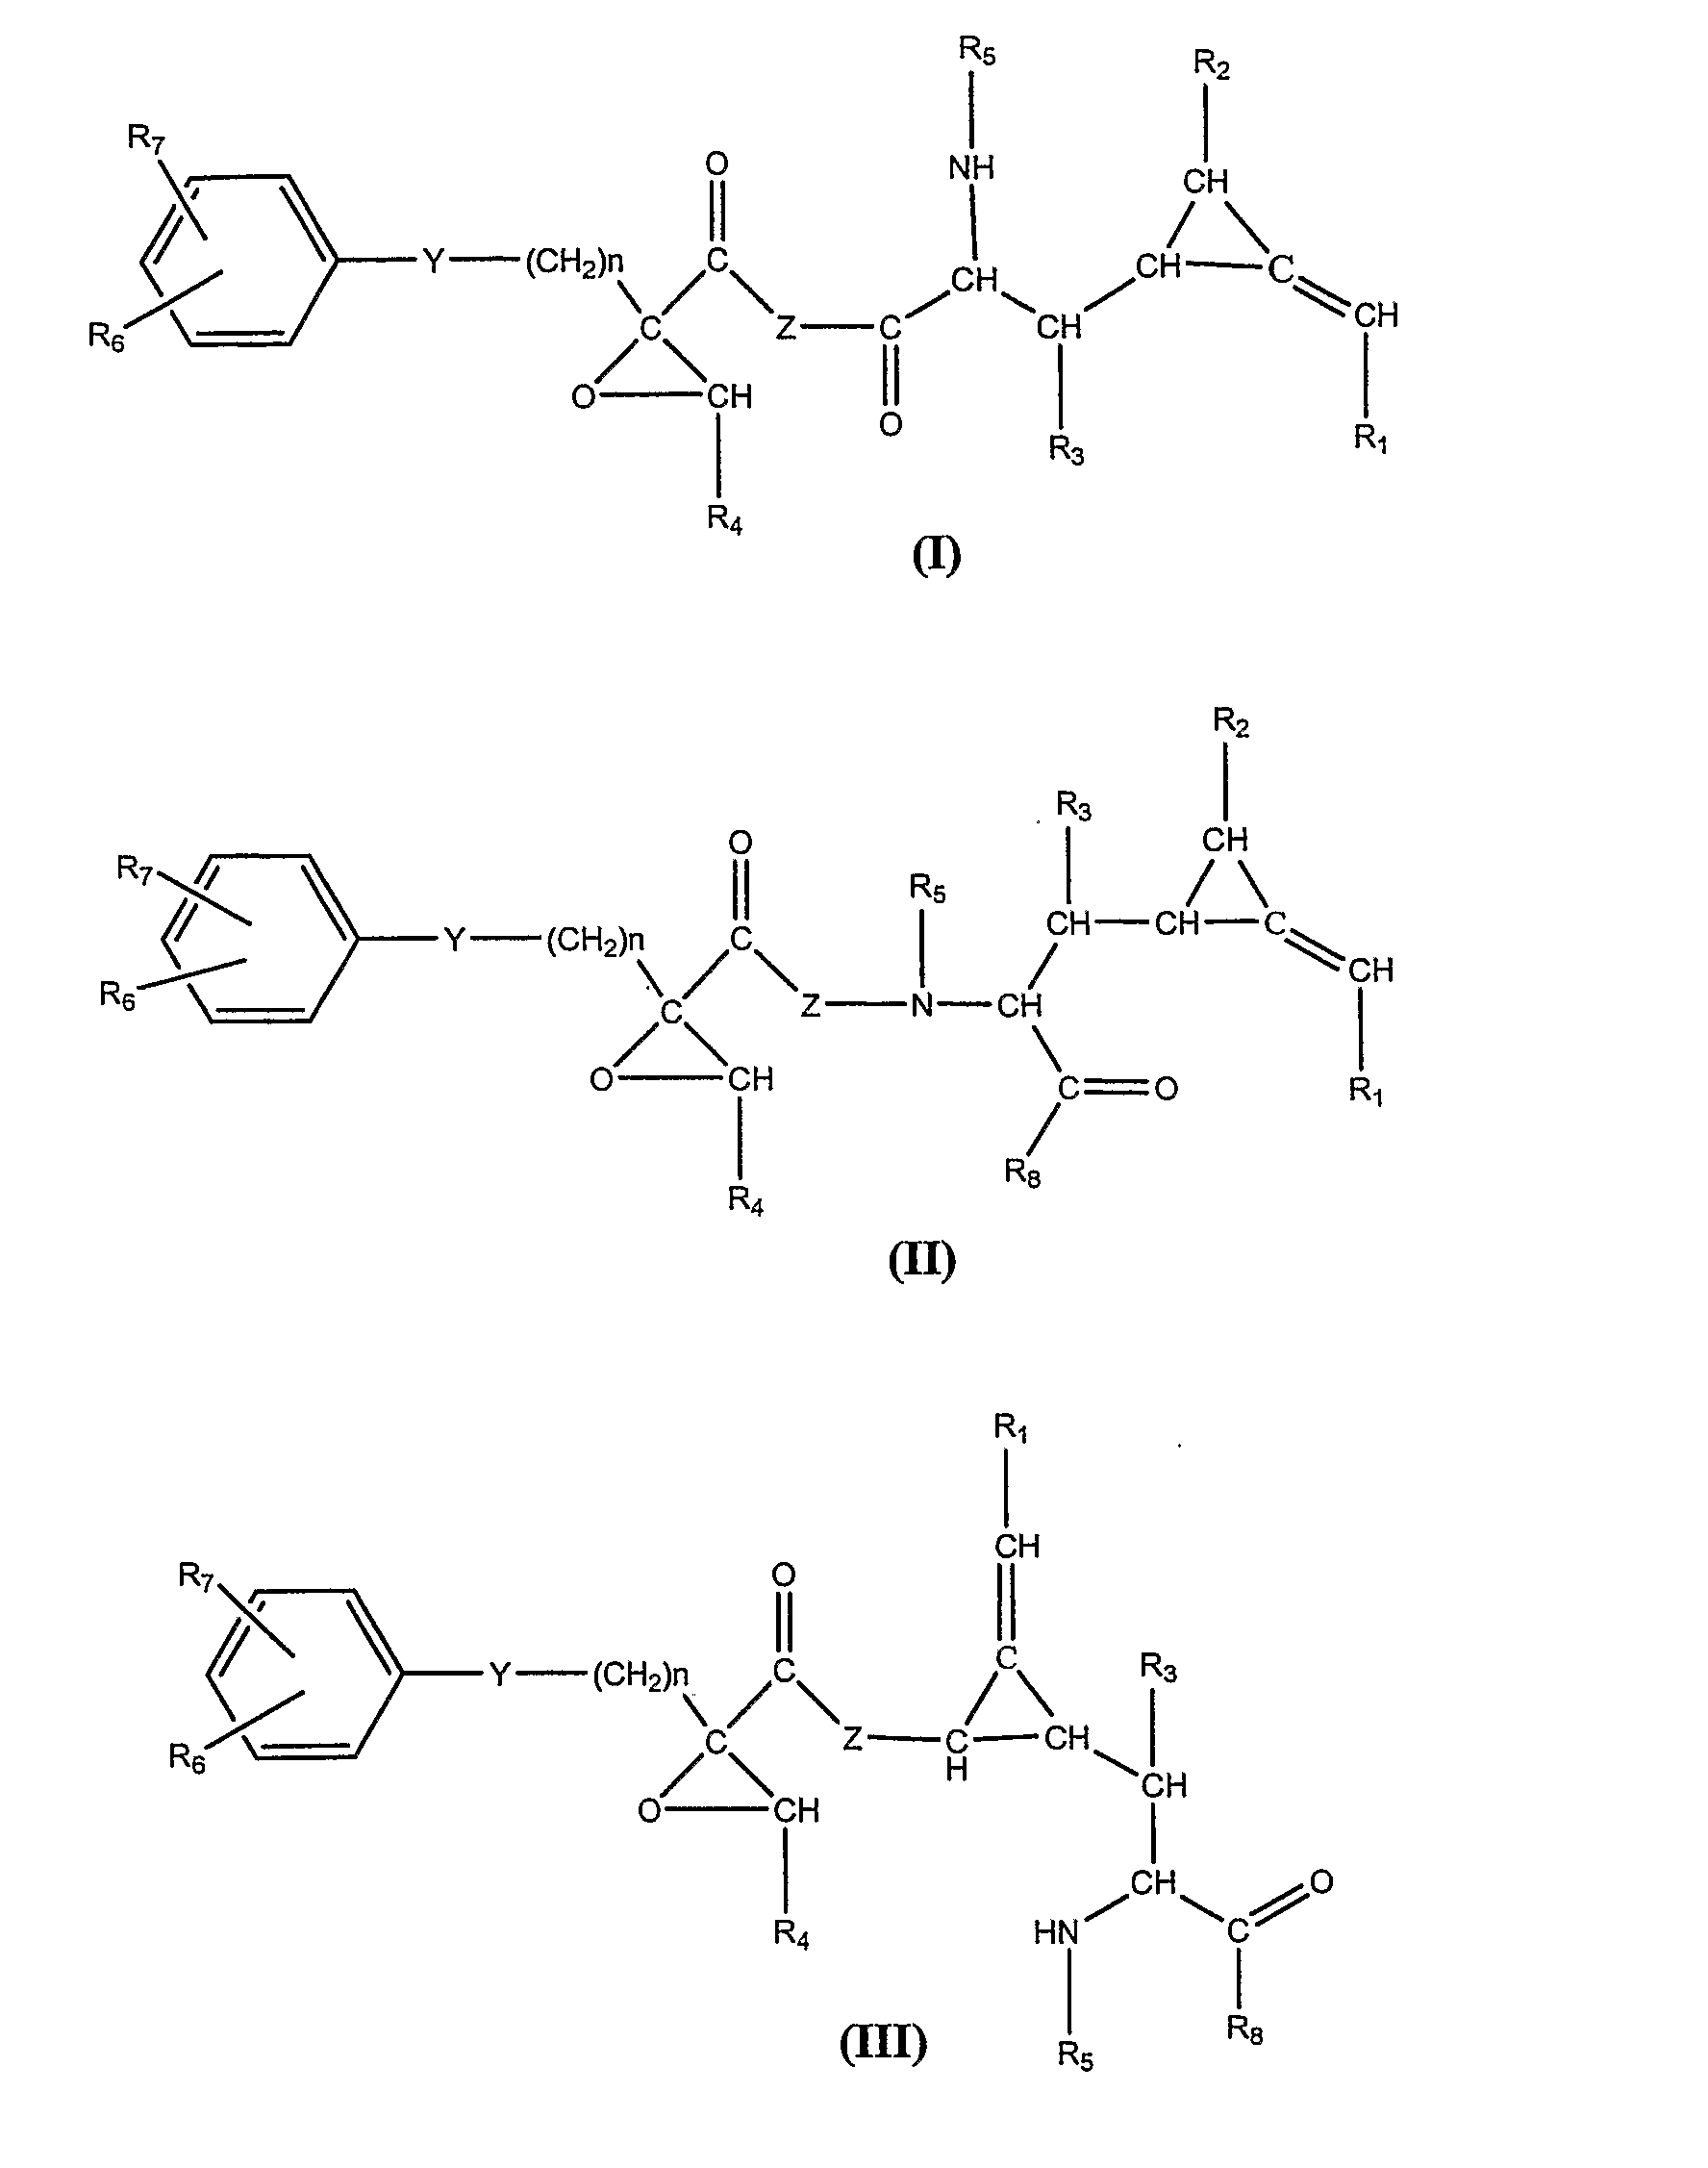 Systems and methods for treating human inflammatory and proliferative diseases, with a combination of compounds, or a bifunctional compound, that provides fatty acid metabolism and glycolysis inhibition